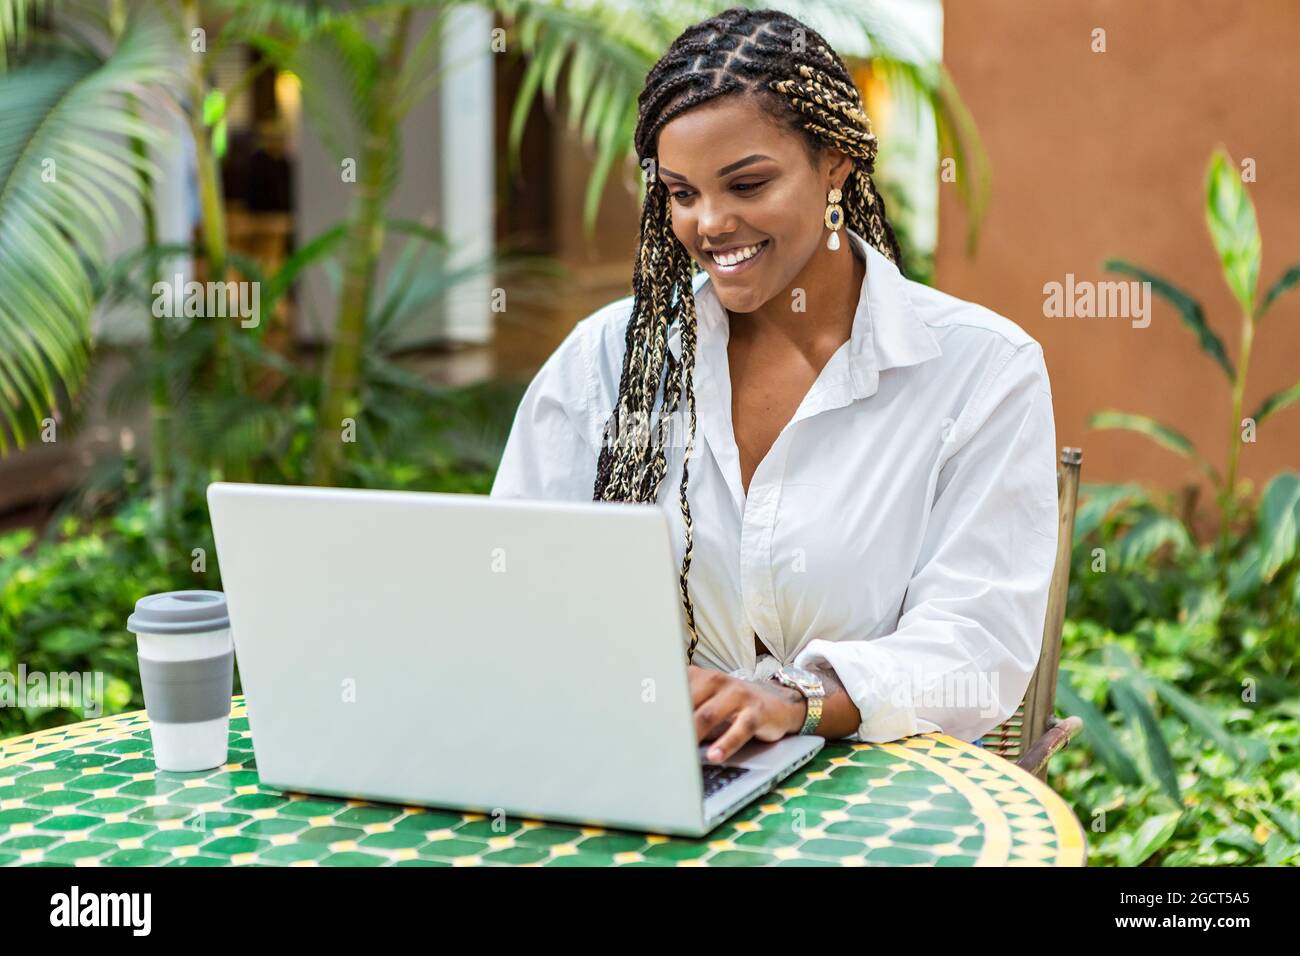 African American woman using laptop in a cafe store outside. Woman with braids sitting using laptop and drinking coffee. Stock Photo